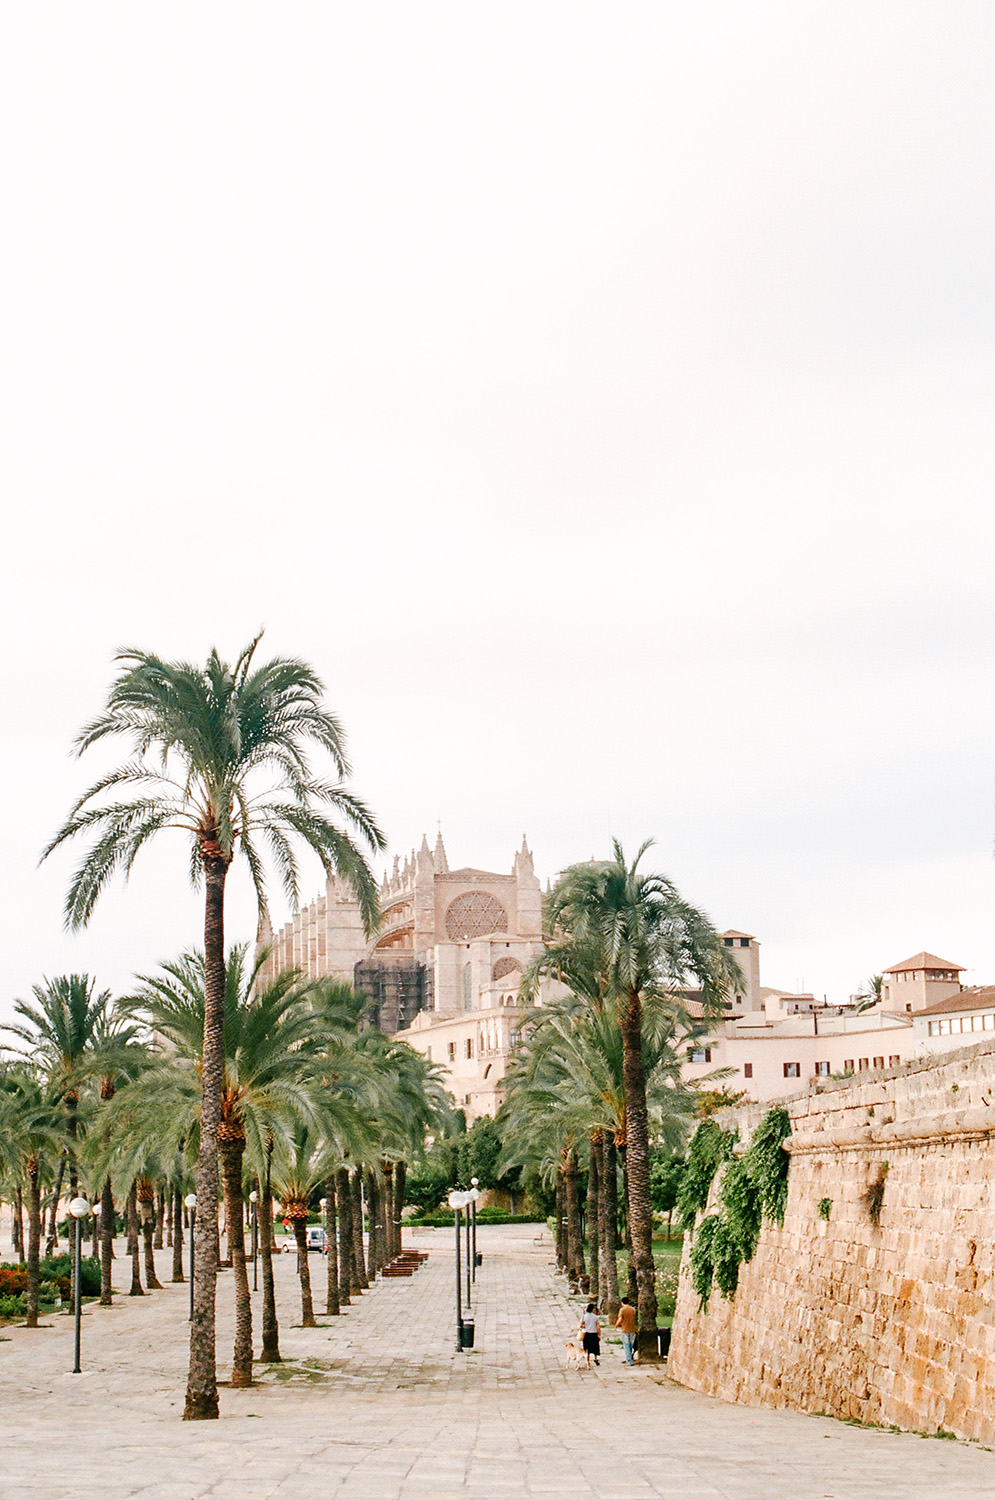 View of the Cathedral in Palma de Mallorca